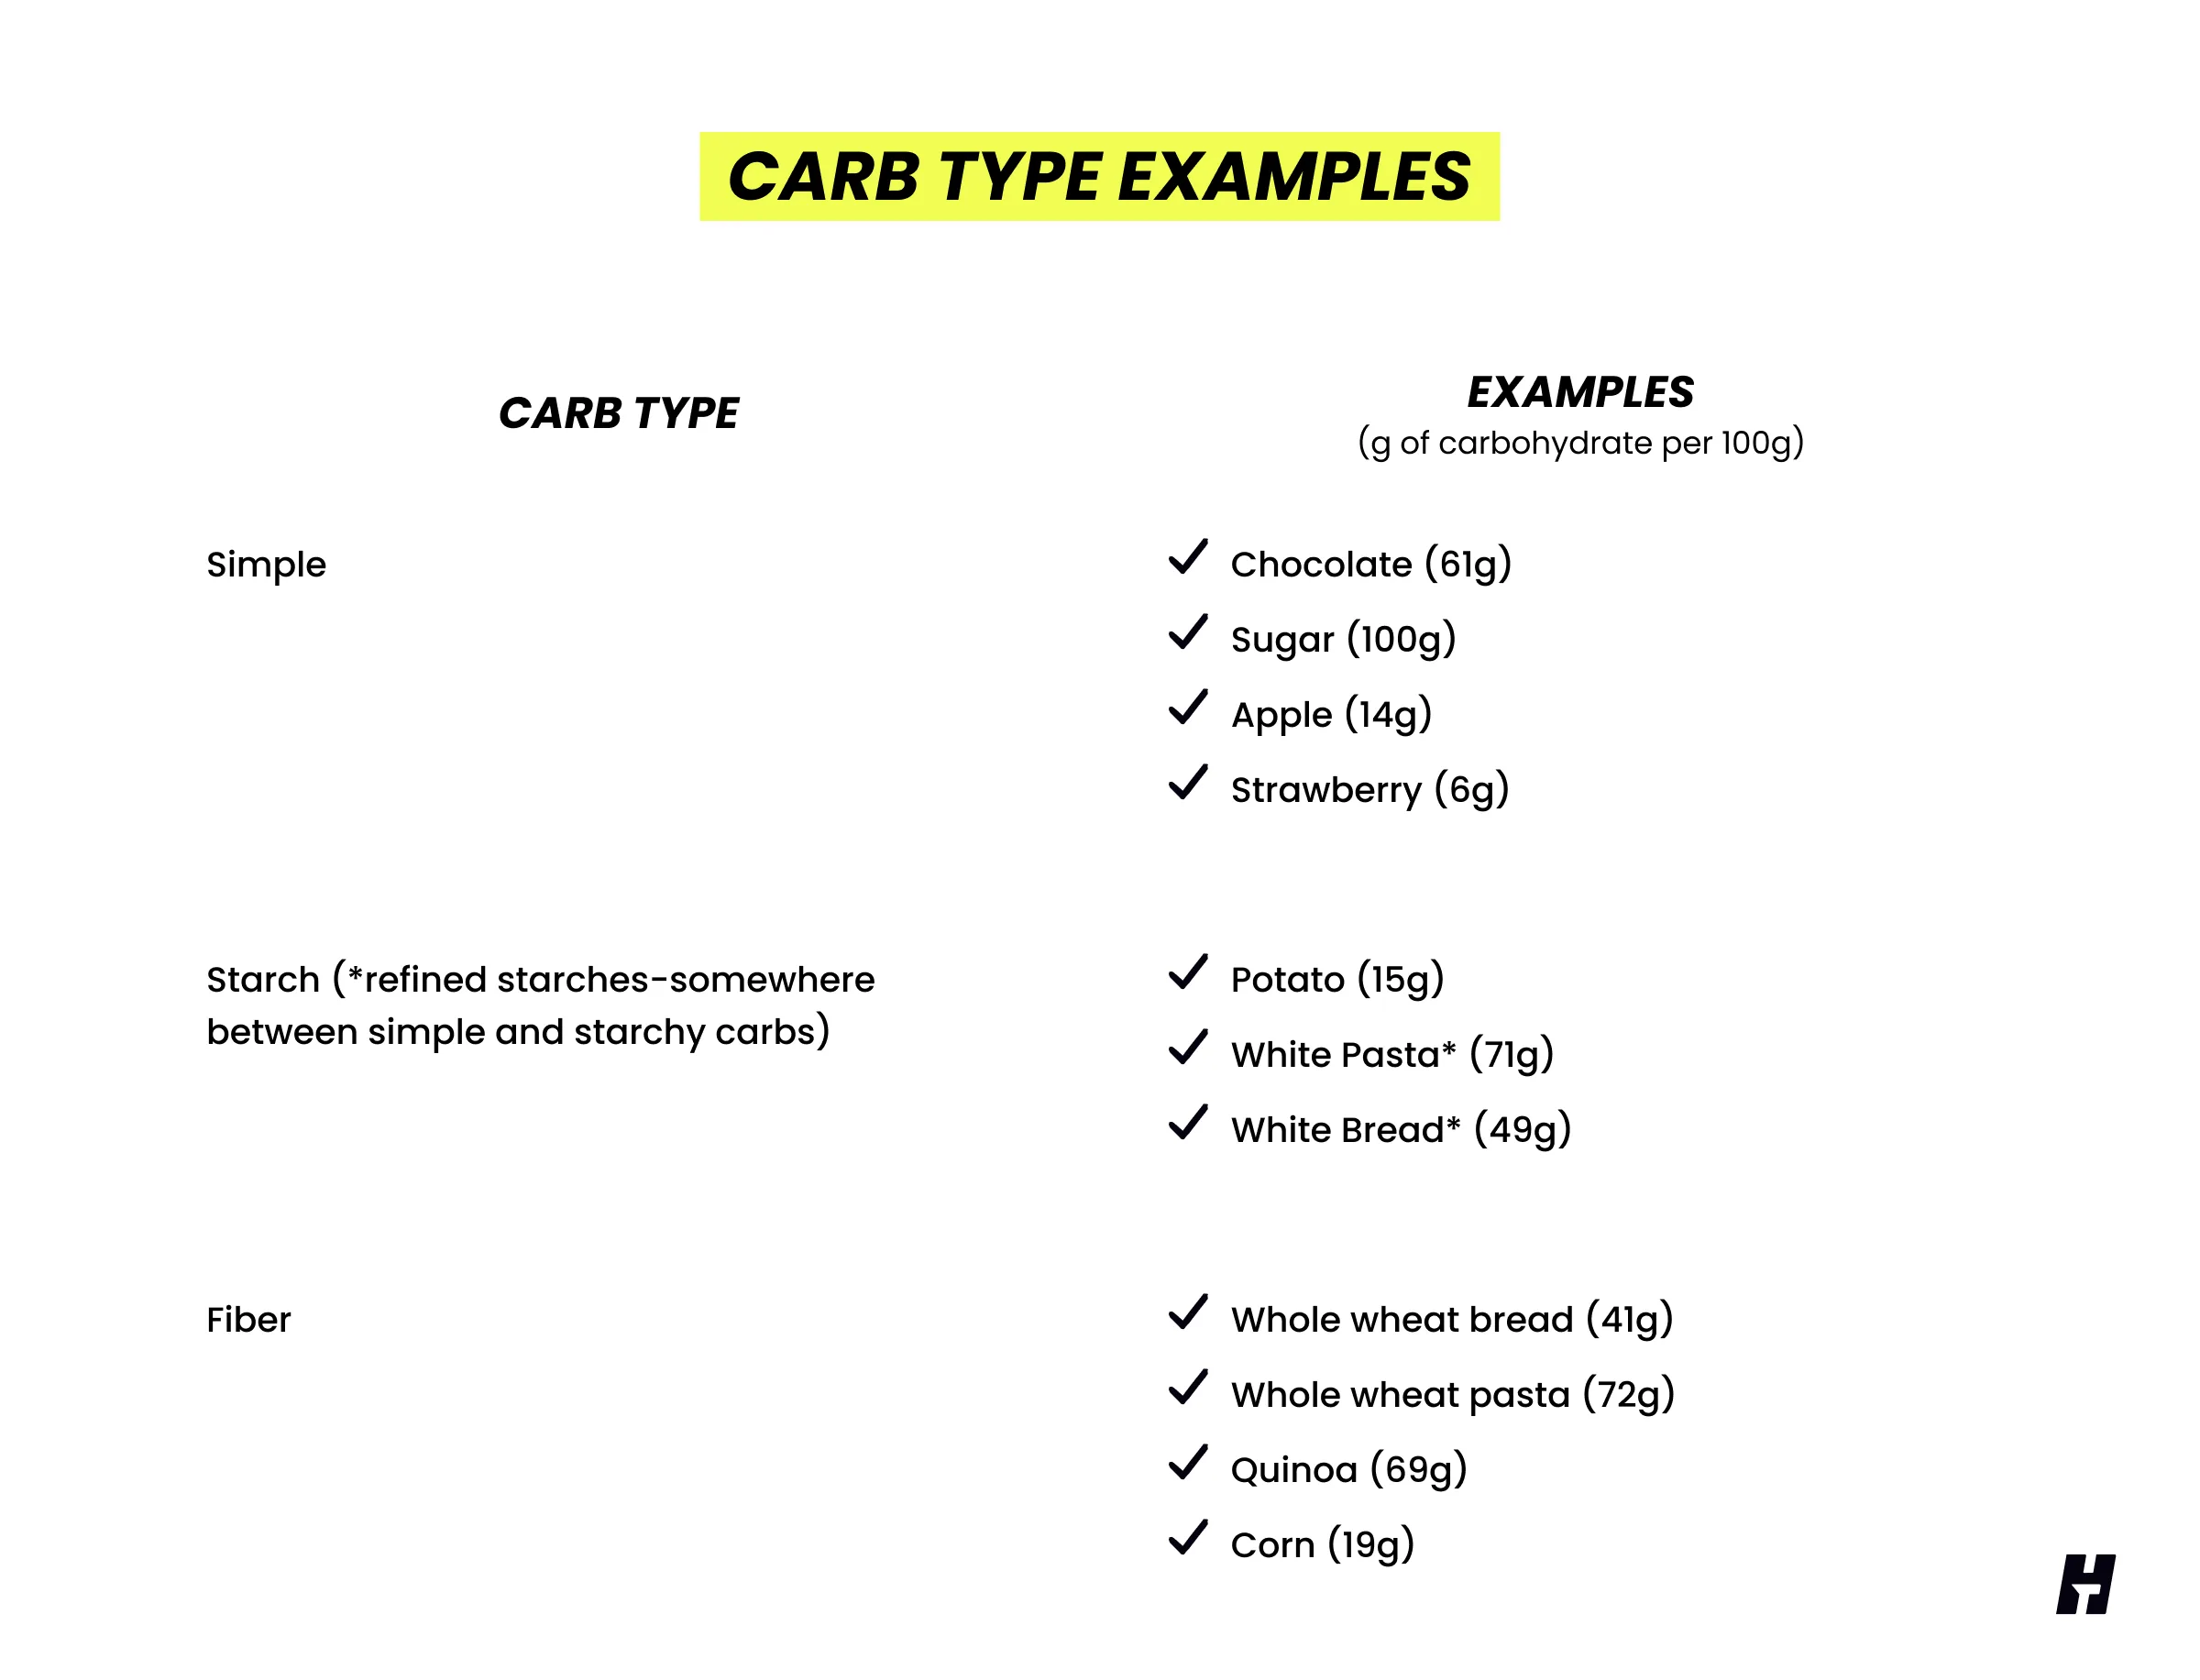 Examples of types of carbohydrates